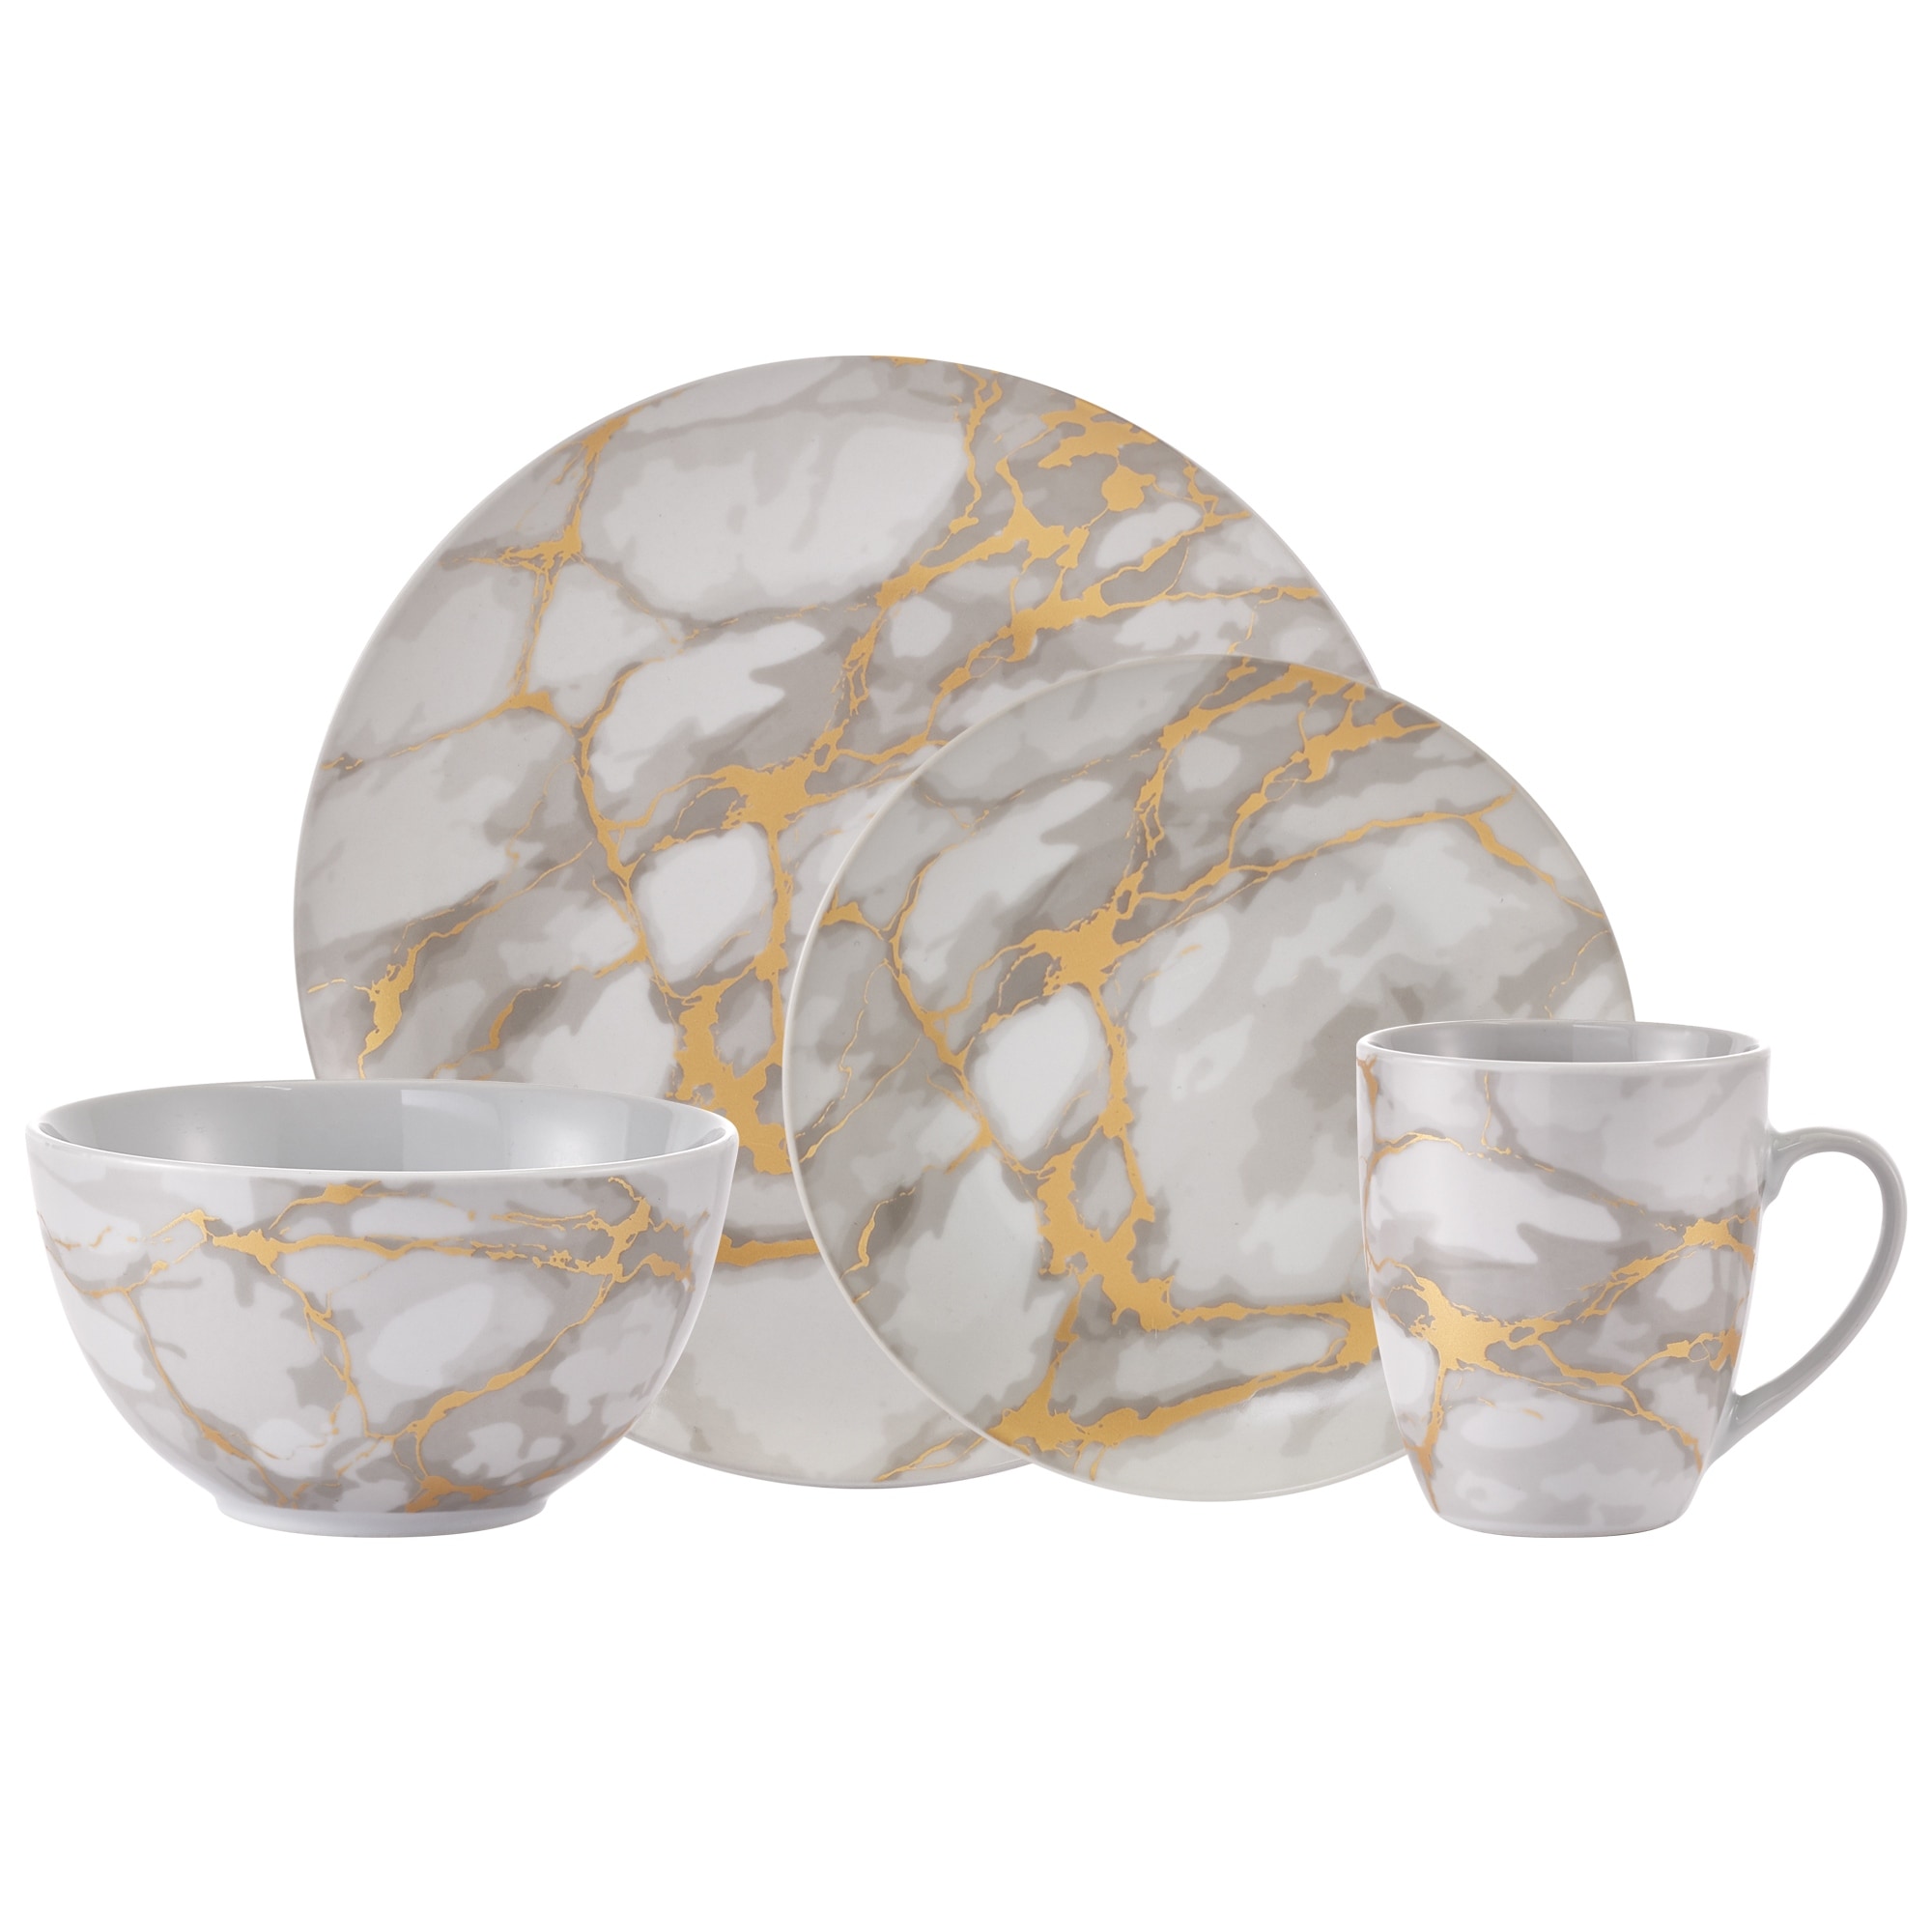 https://ak1.ostkcdn.com/images/products/is/images/direct/ffff0751ec65557083ae211f87bfa8112fdddd2e/Dinnerset-16PC-Coupe-Gold-Marble.jpg